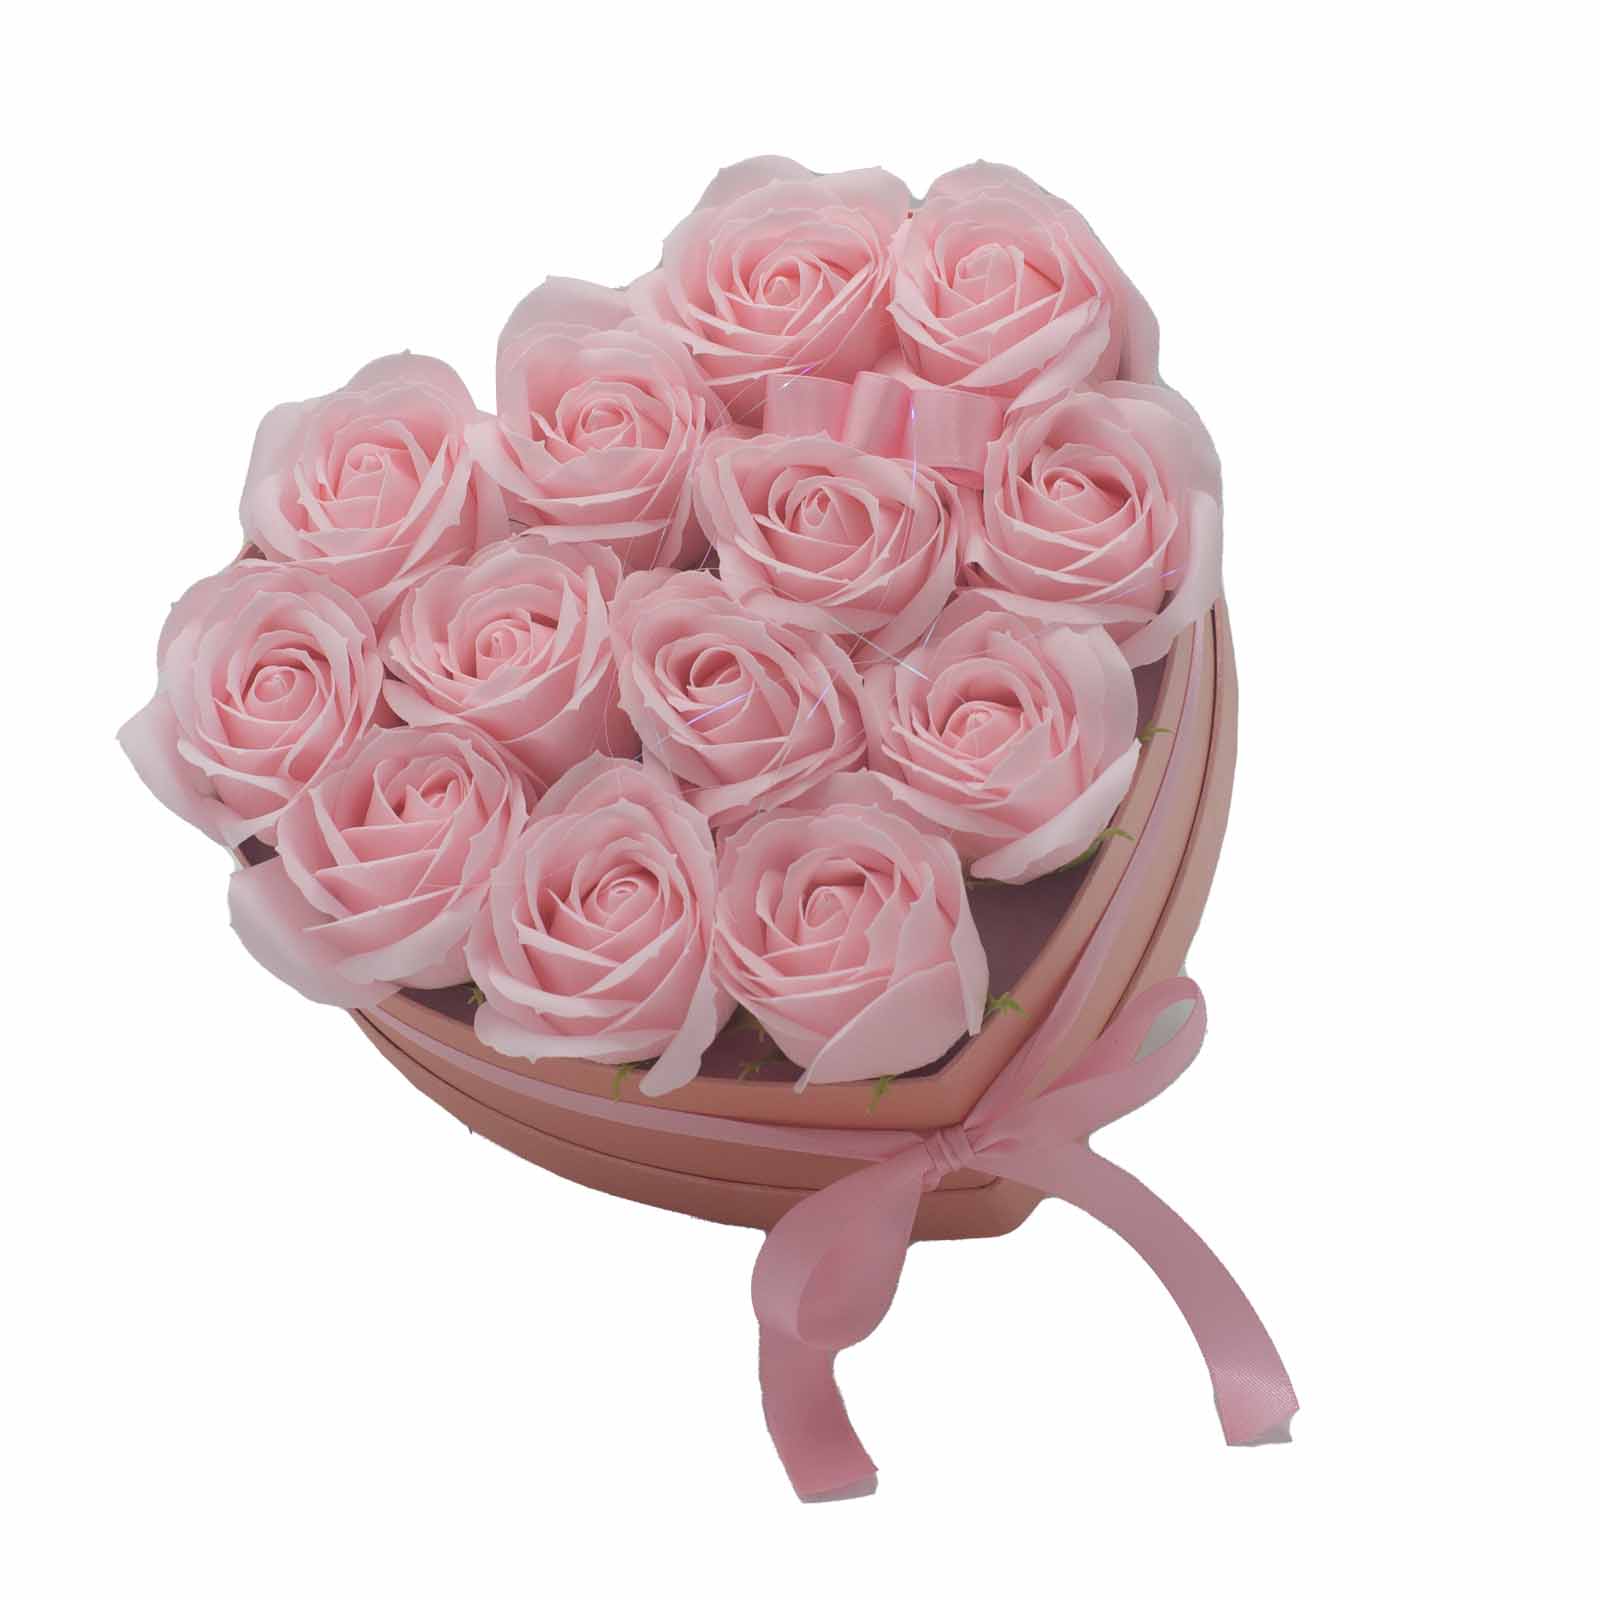 Soap Flower Gift Bouquet - 13 Pink Roses - Heart - Click Image to Close